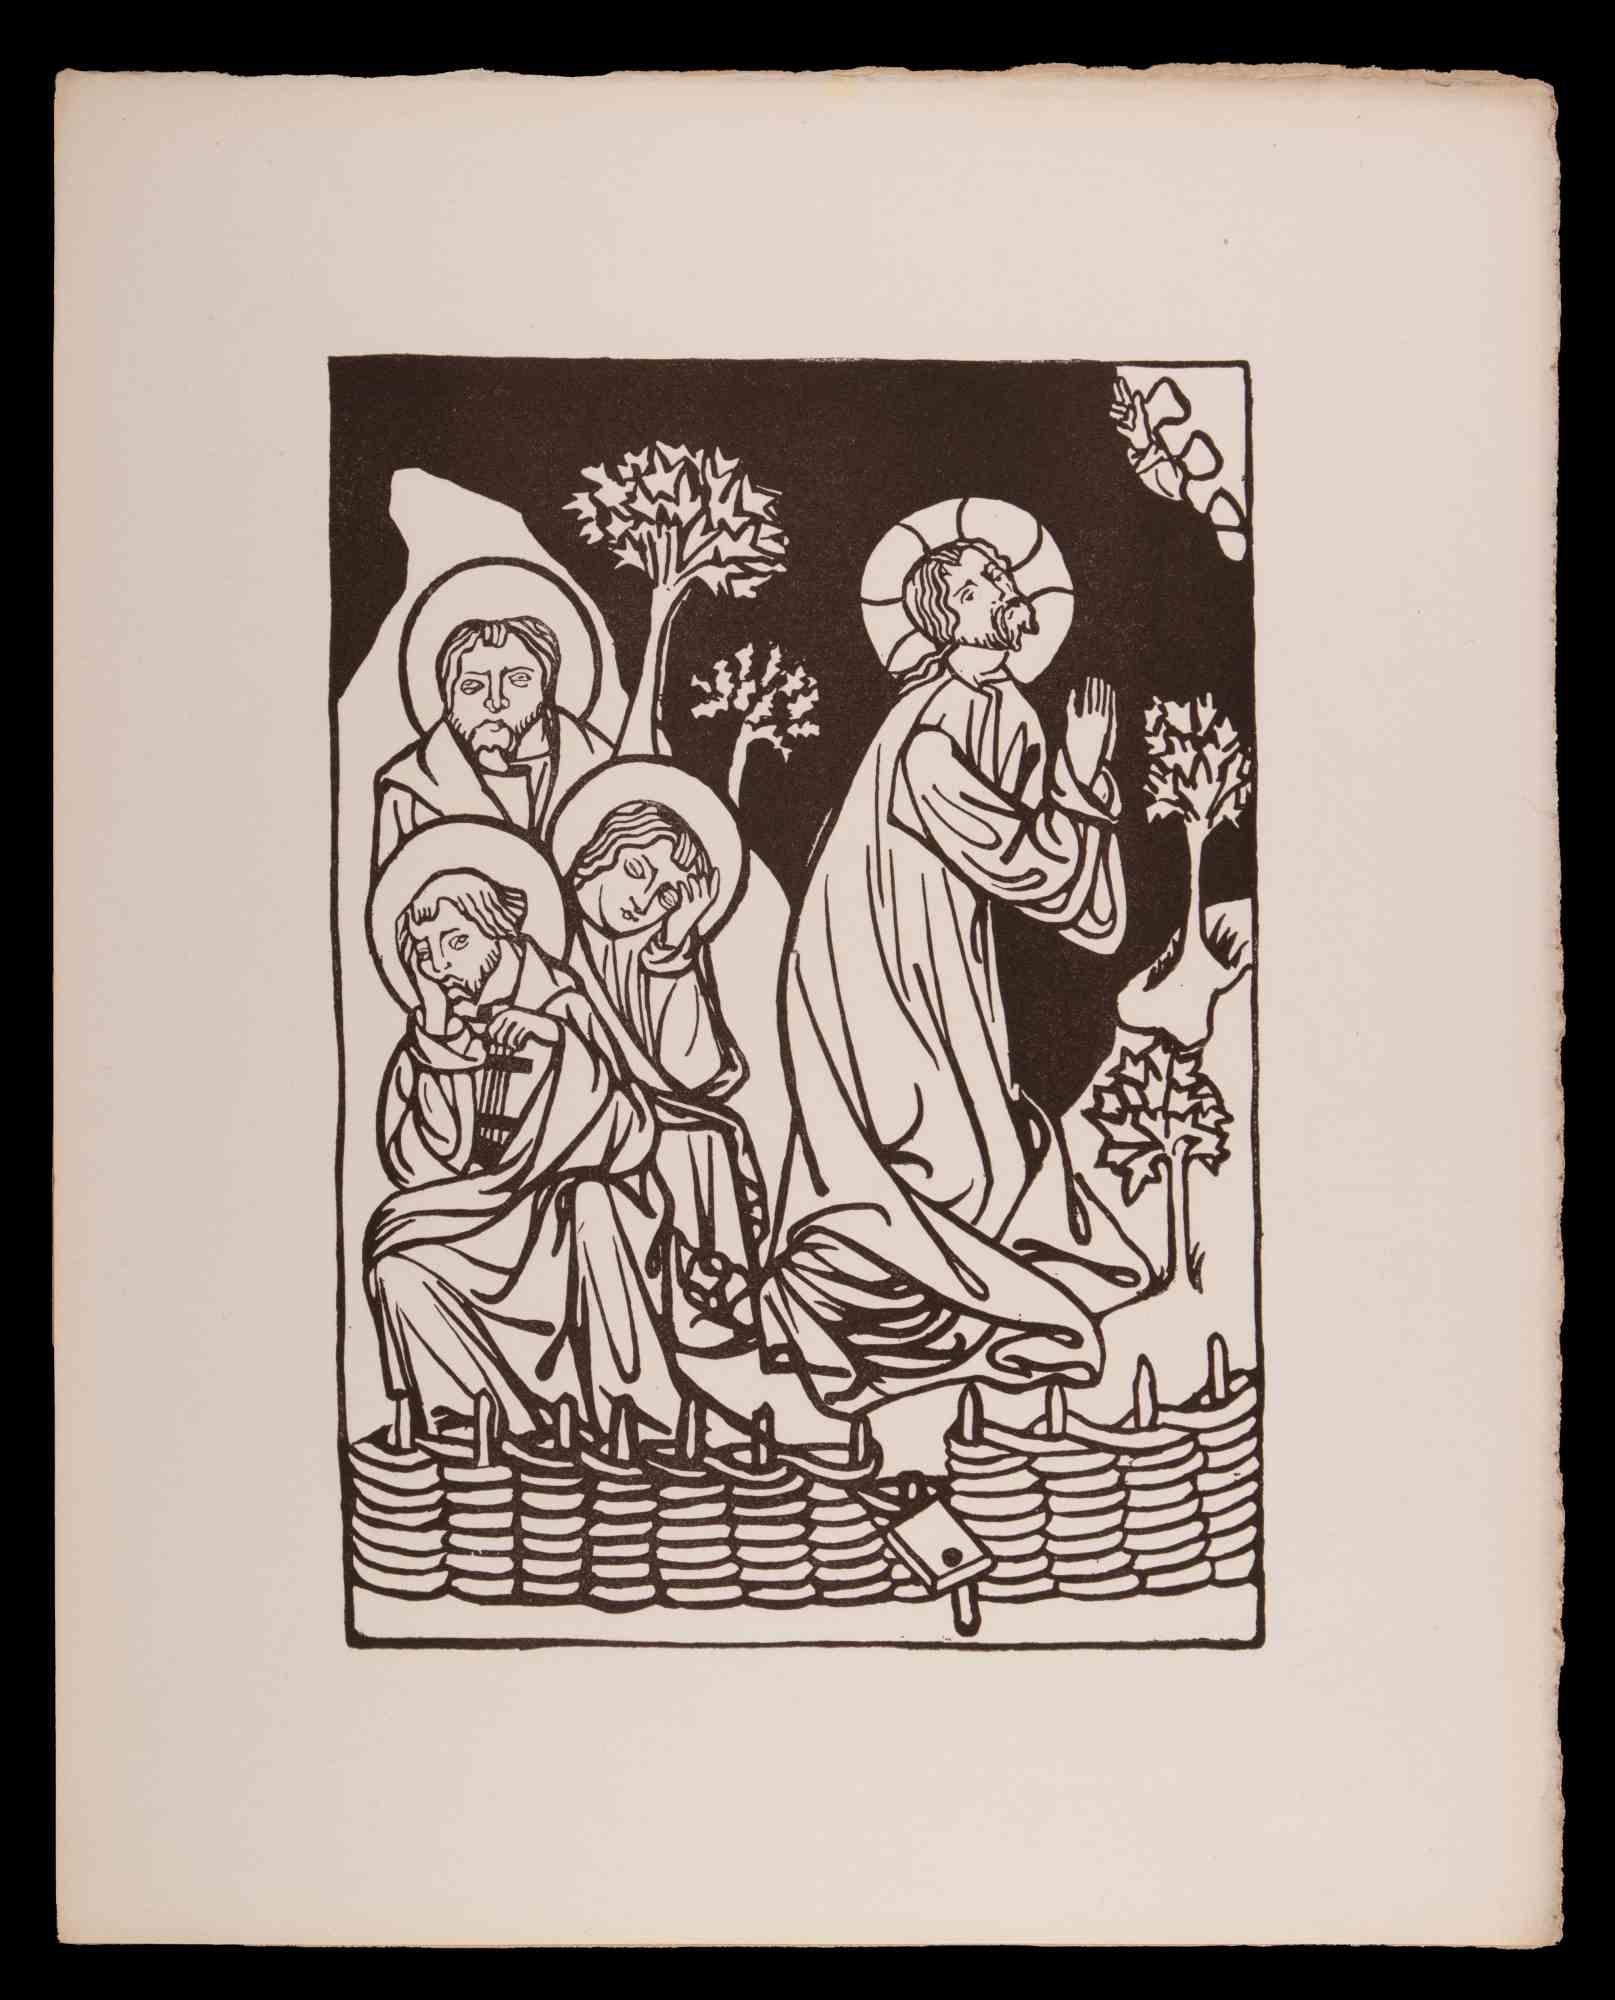 Jesus and the Disciples - Original Woodcut print by François Bouchot - 1922